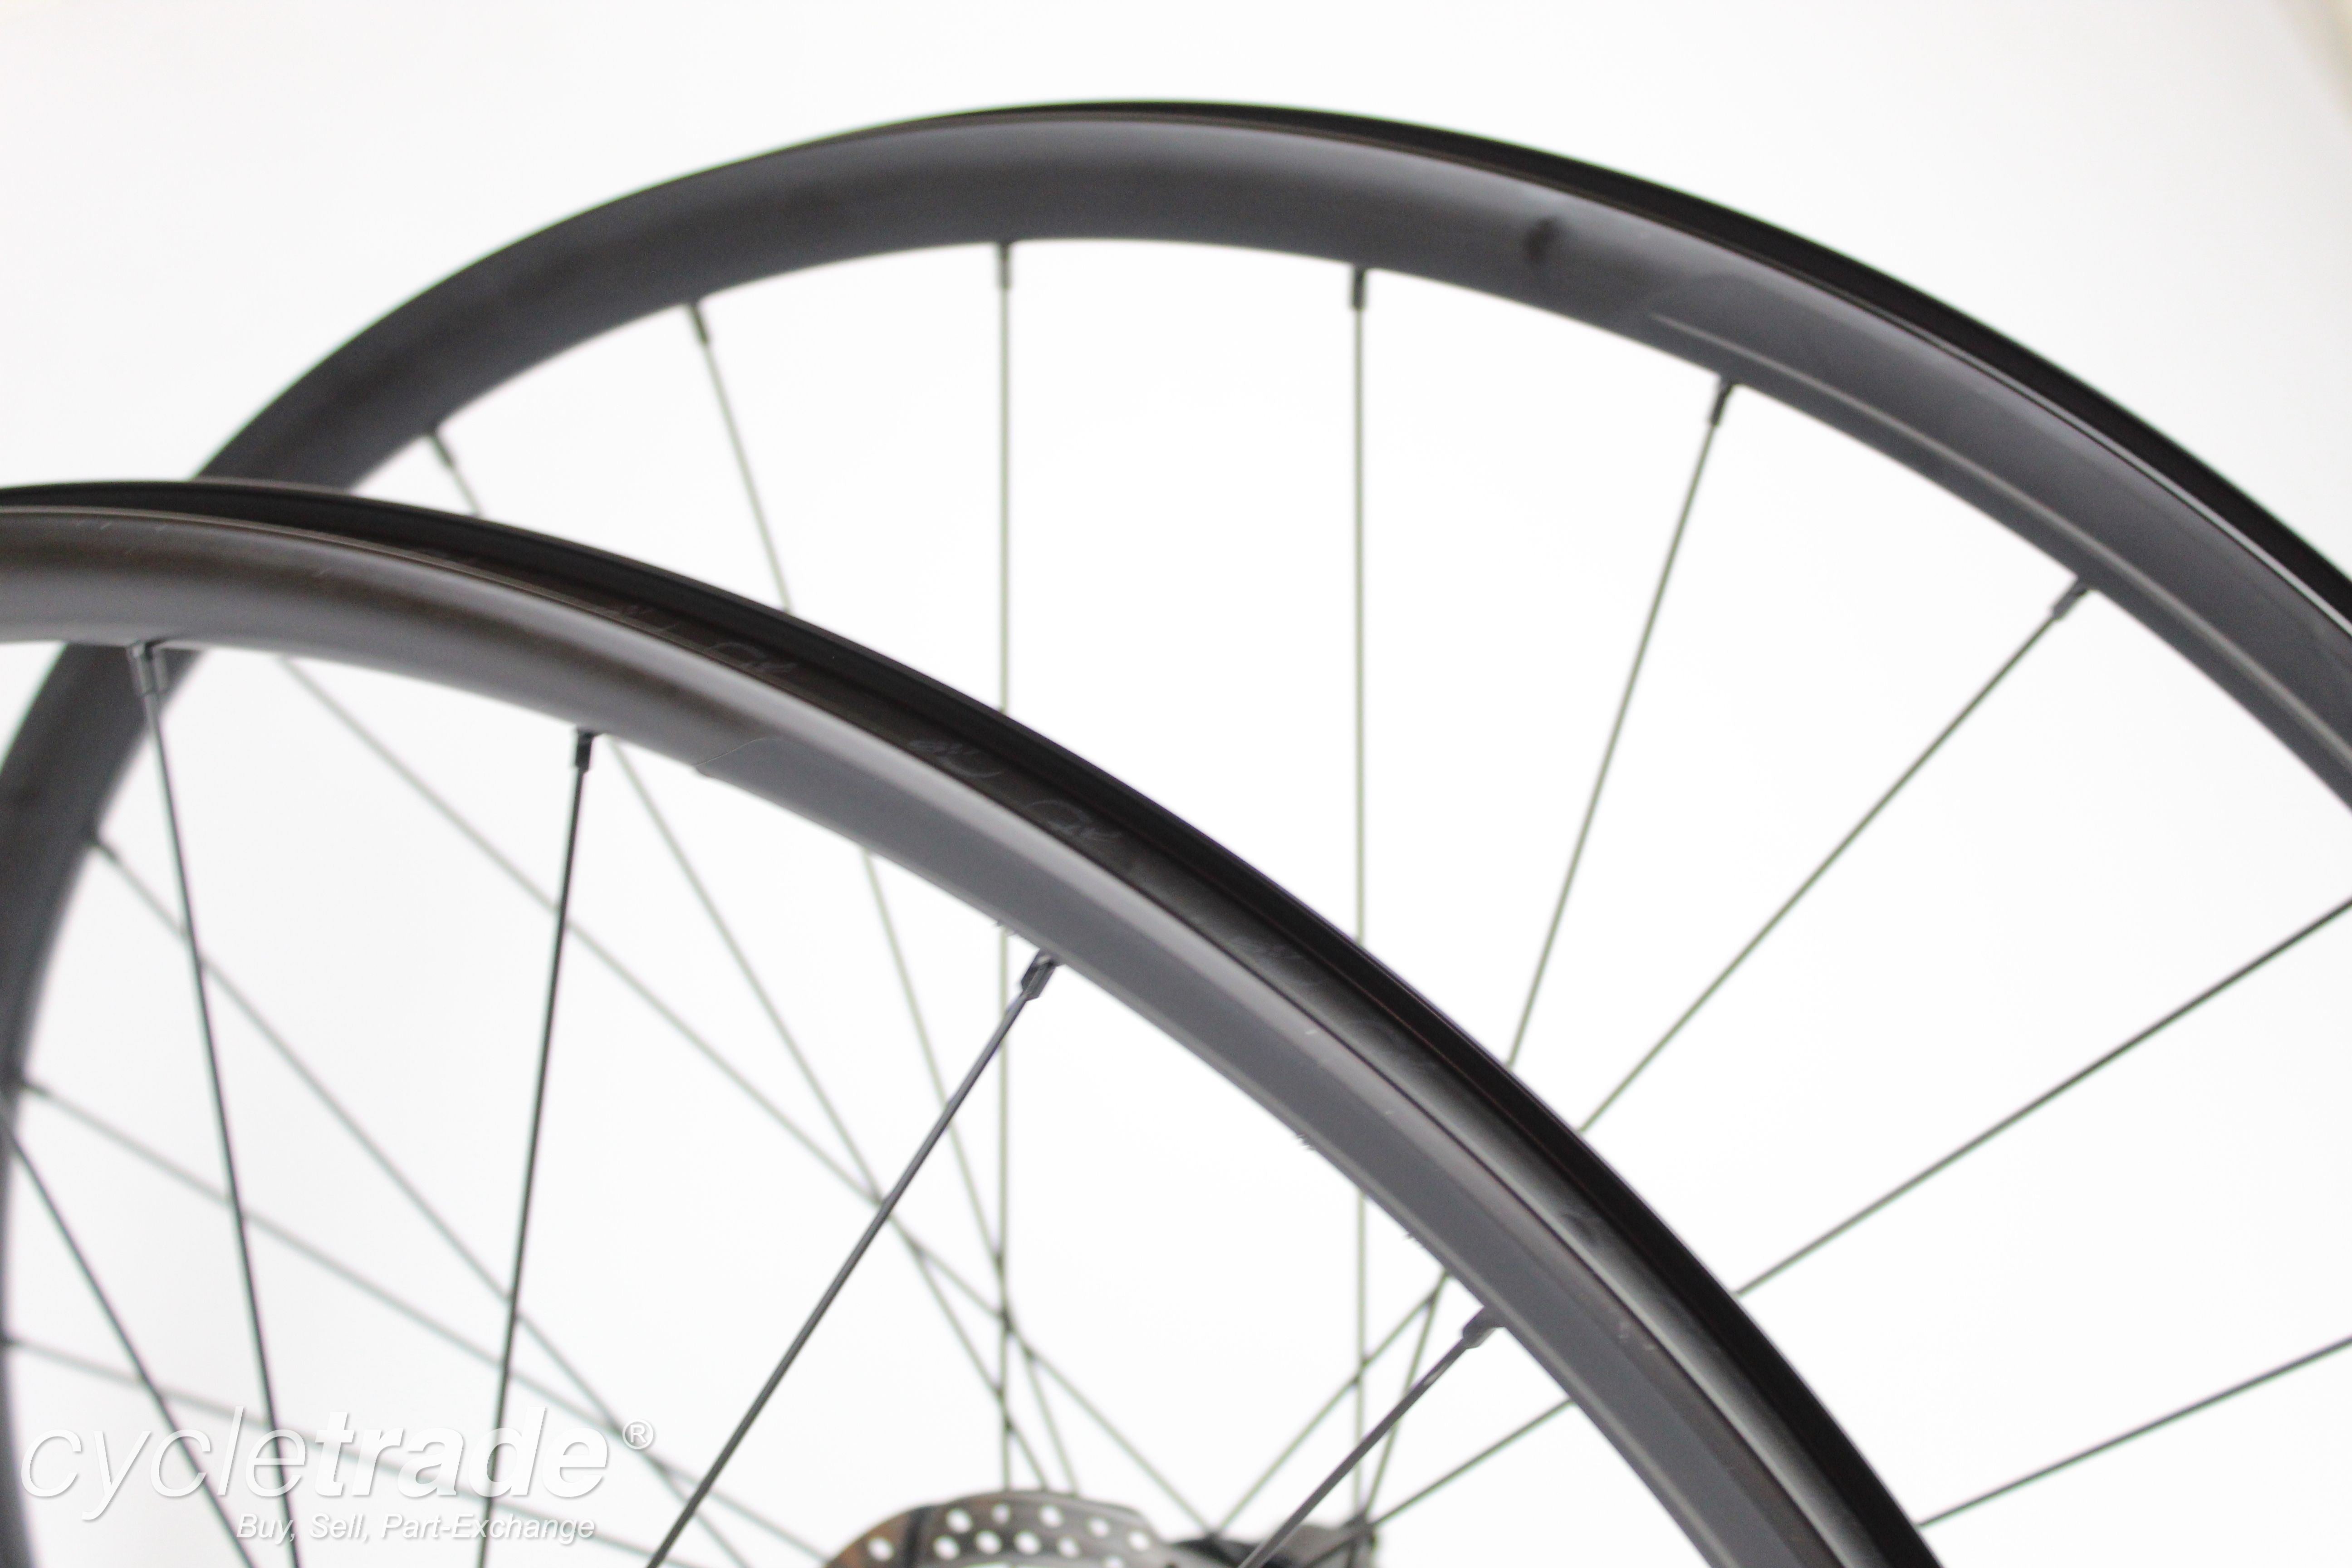 700c Road Disc Wheelset - Specialized Axis Sport, 11 Speed - Grade B+